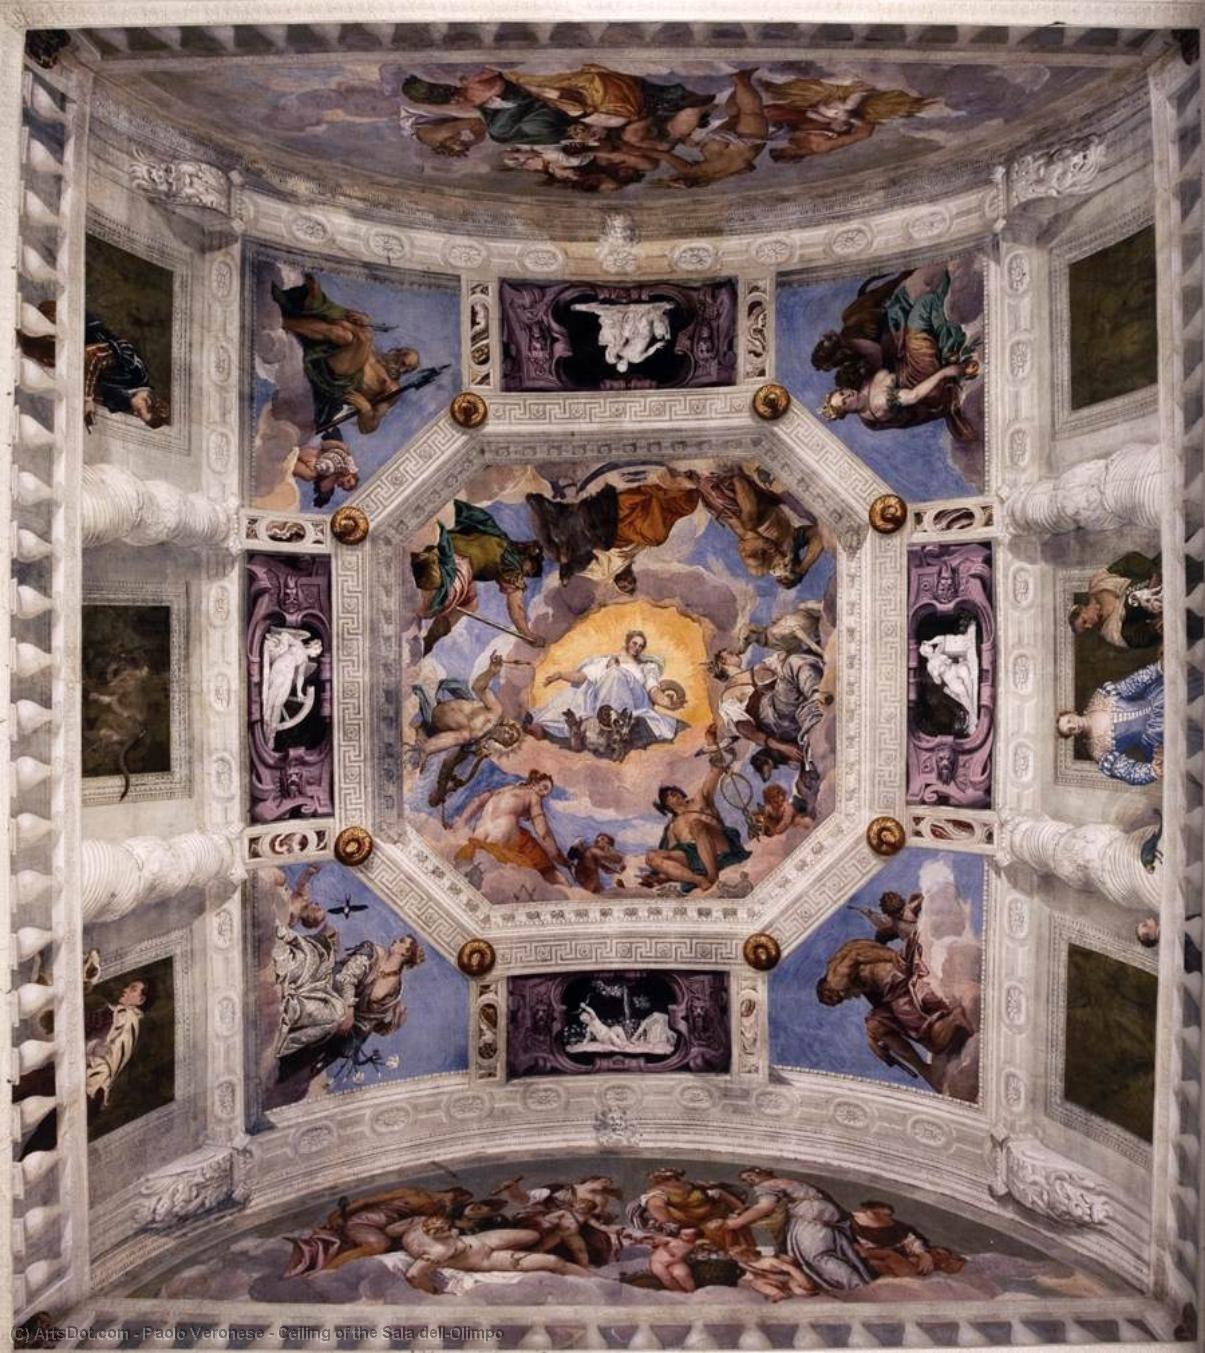 WikiOO.org - Encyclopedia of Fine Arts - Malba, Artwork Paolo Veronese - Ceiling of the Sala dell'Olimpo